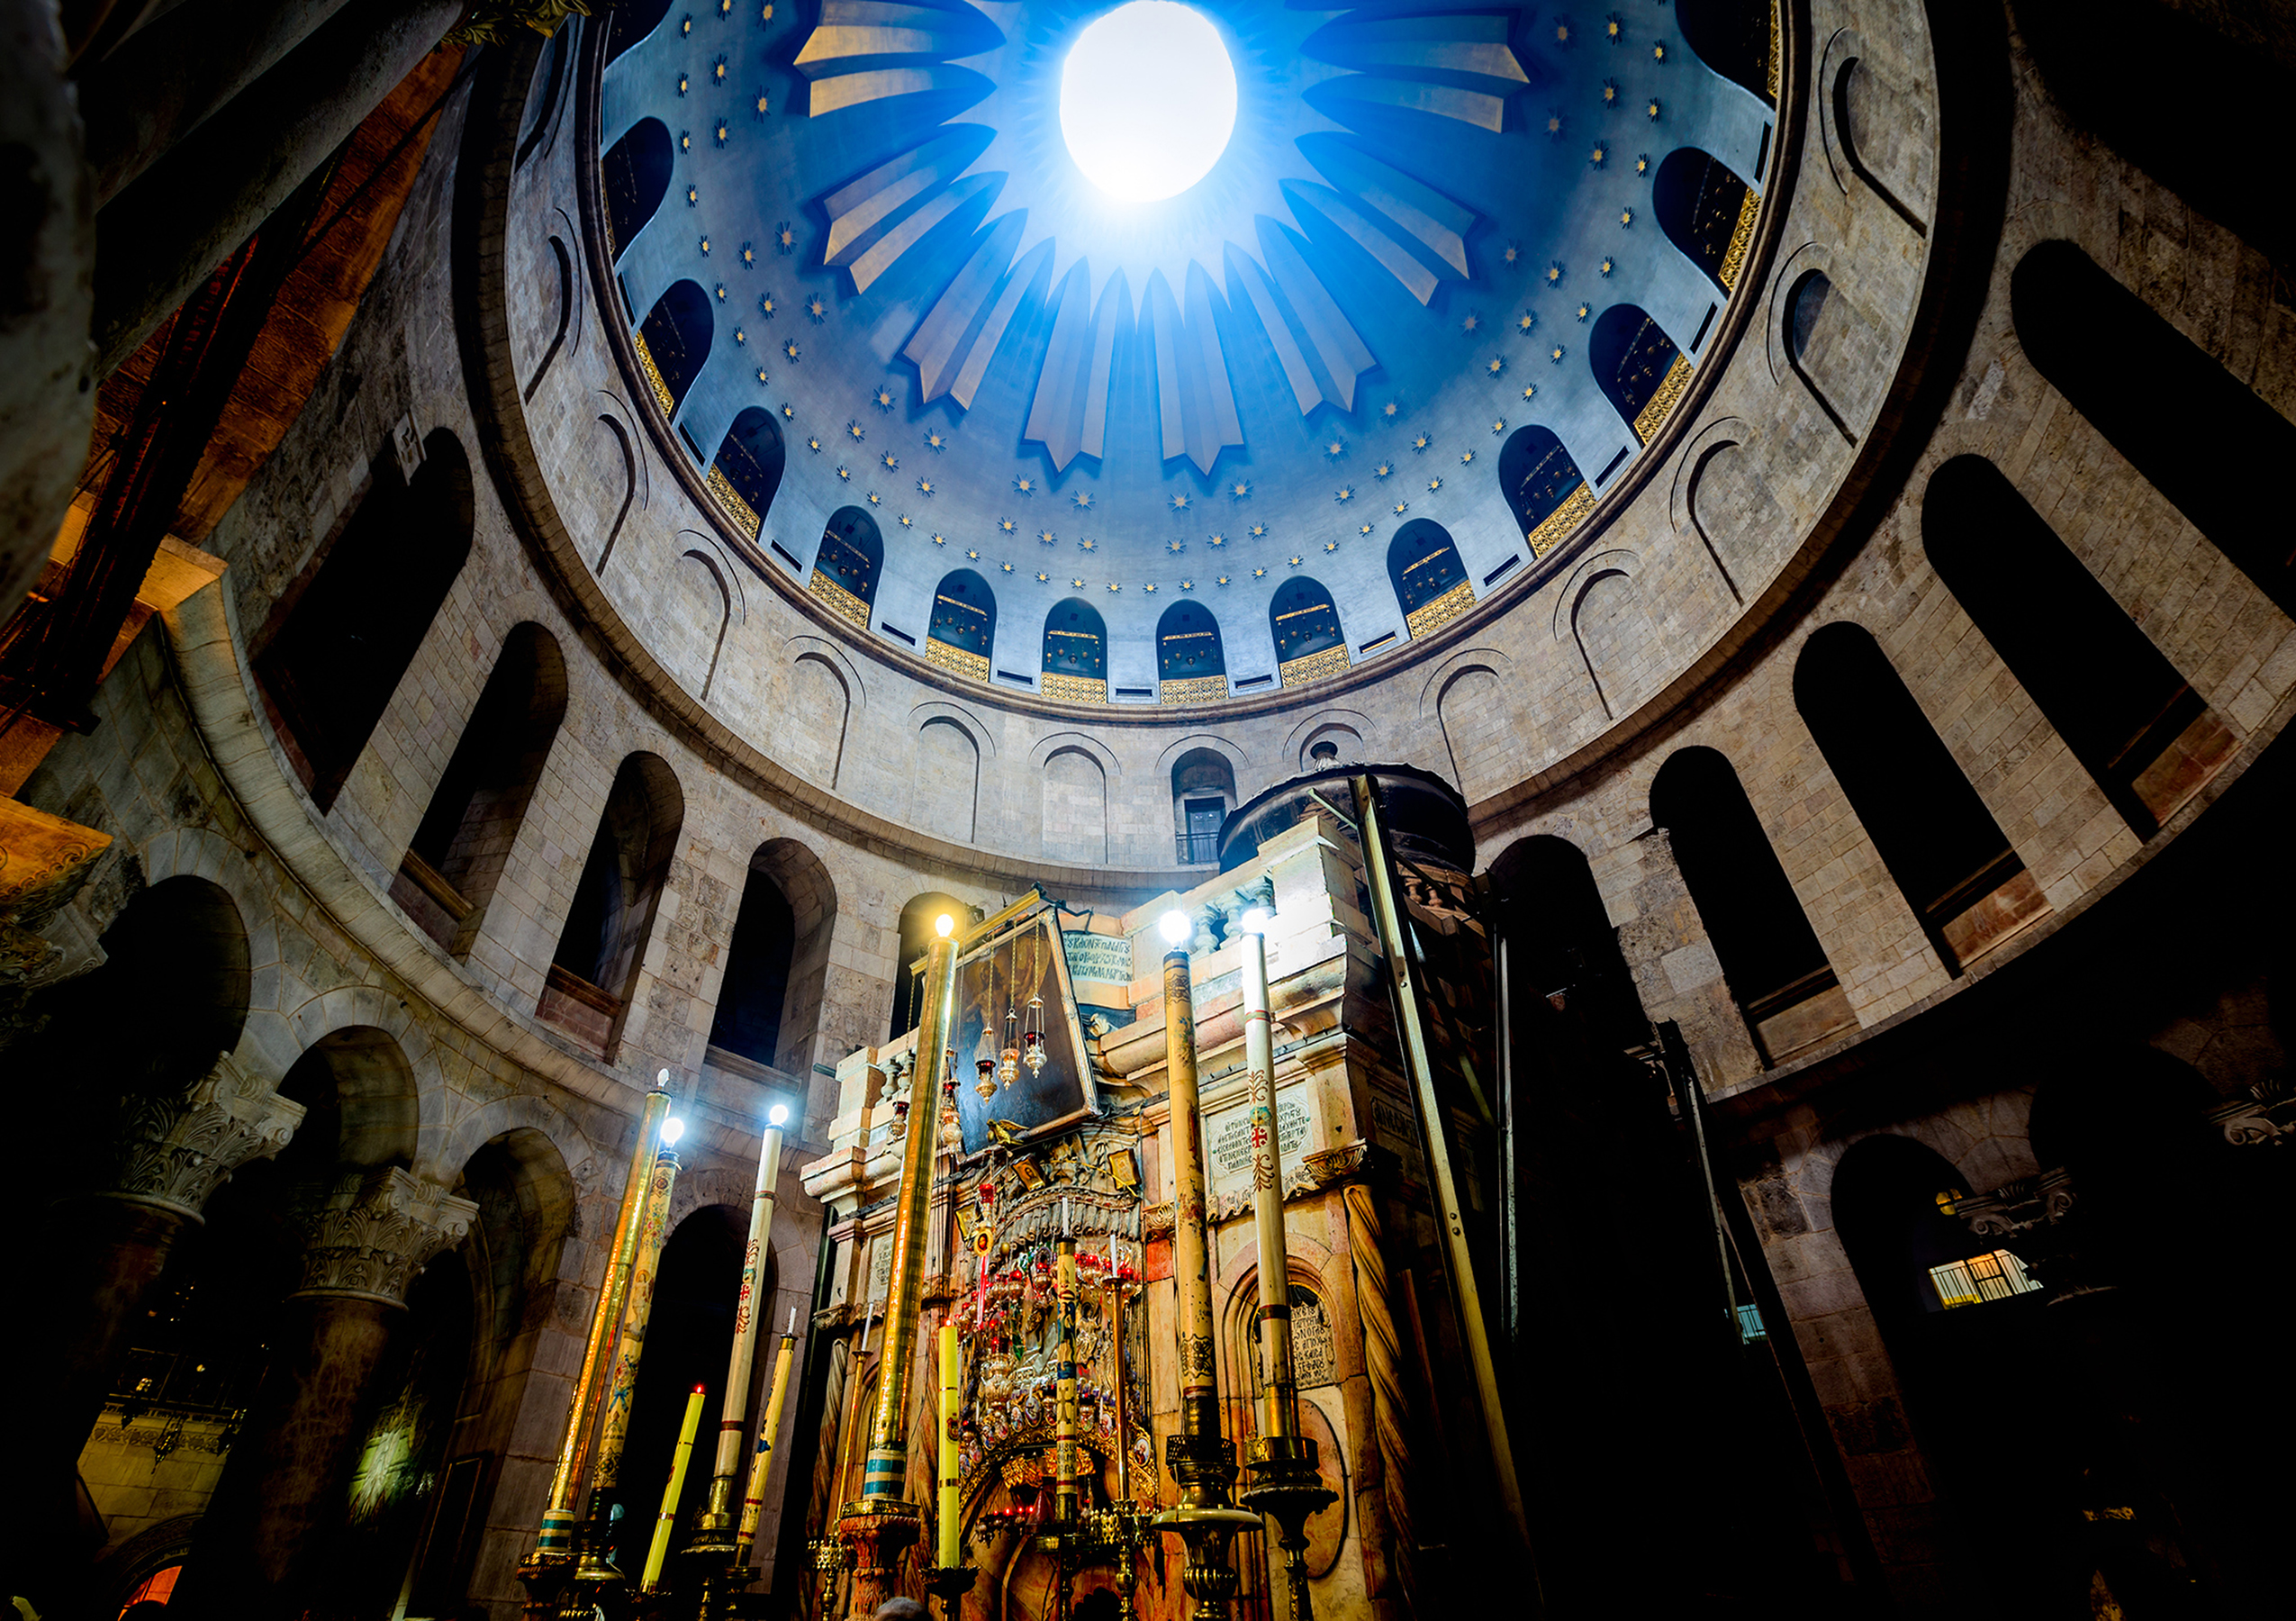 The tomb of Jesus Christ in the Church of the Holy Sepulcher in Jerusalem.